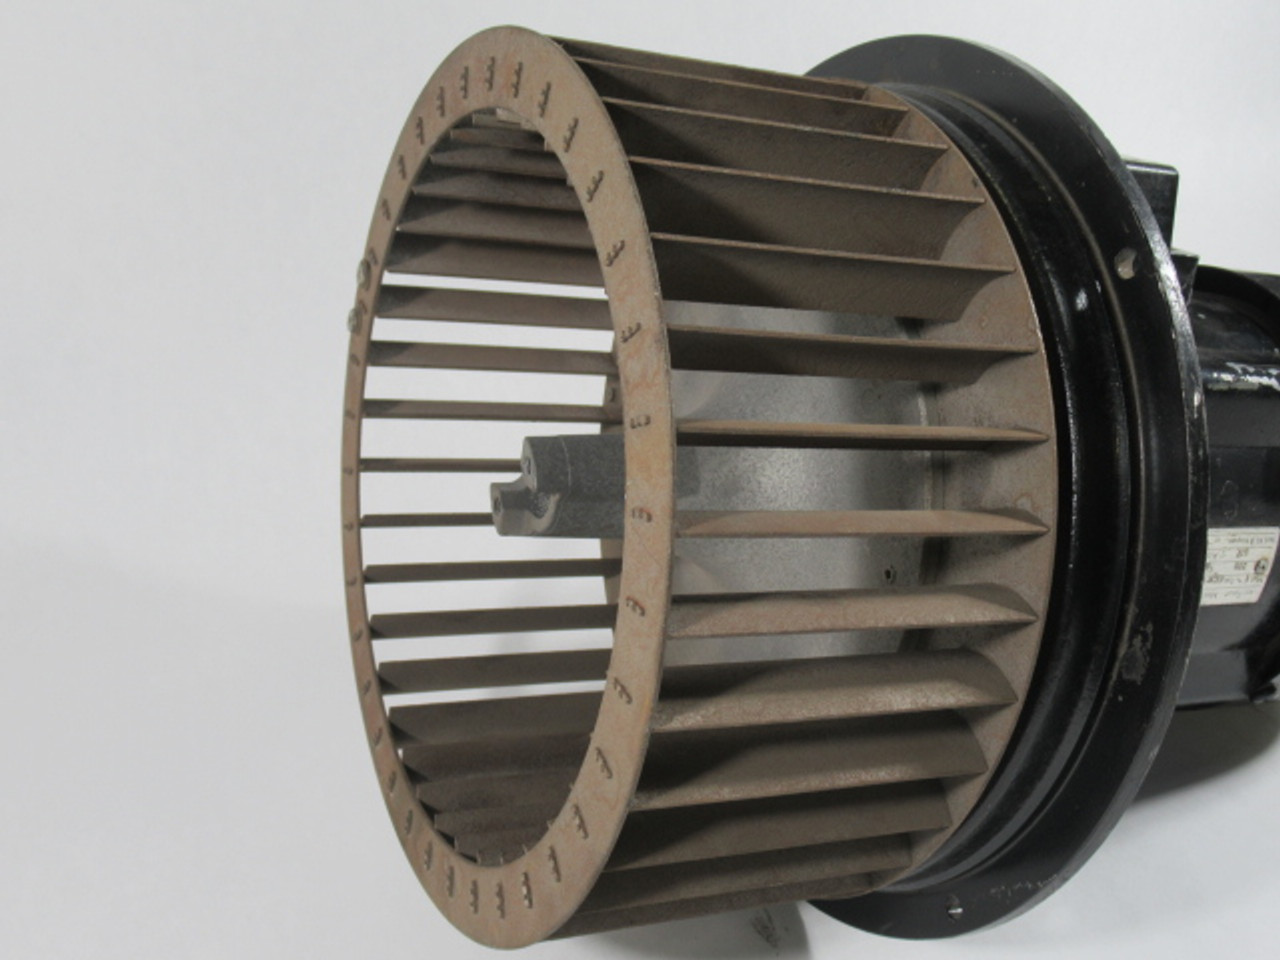 Weishaupt 0.85kW 3410RPM 220V 1PH 5.7A 60Hz C/W Fan Blade Attachment USED